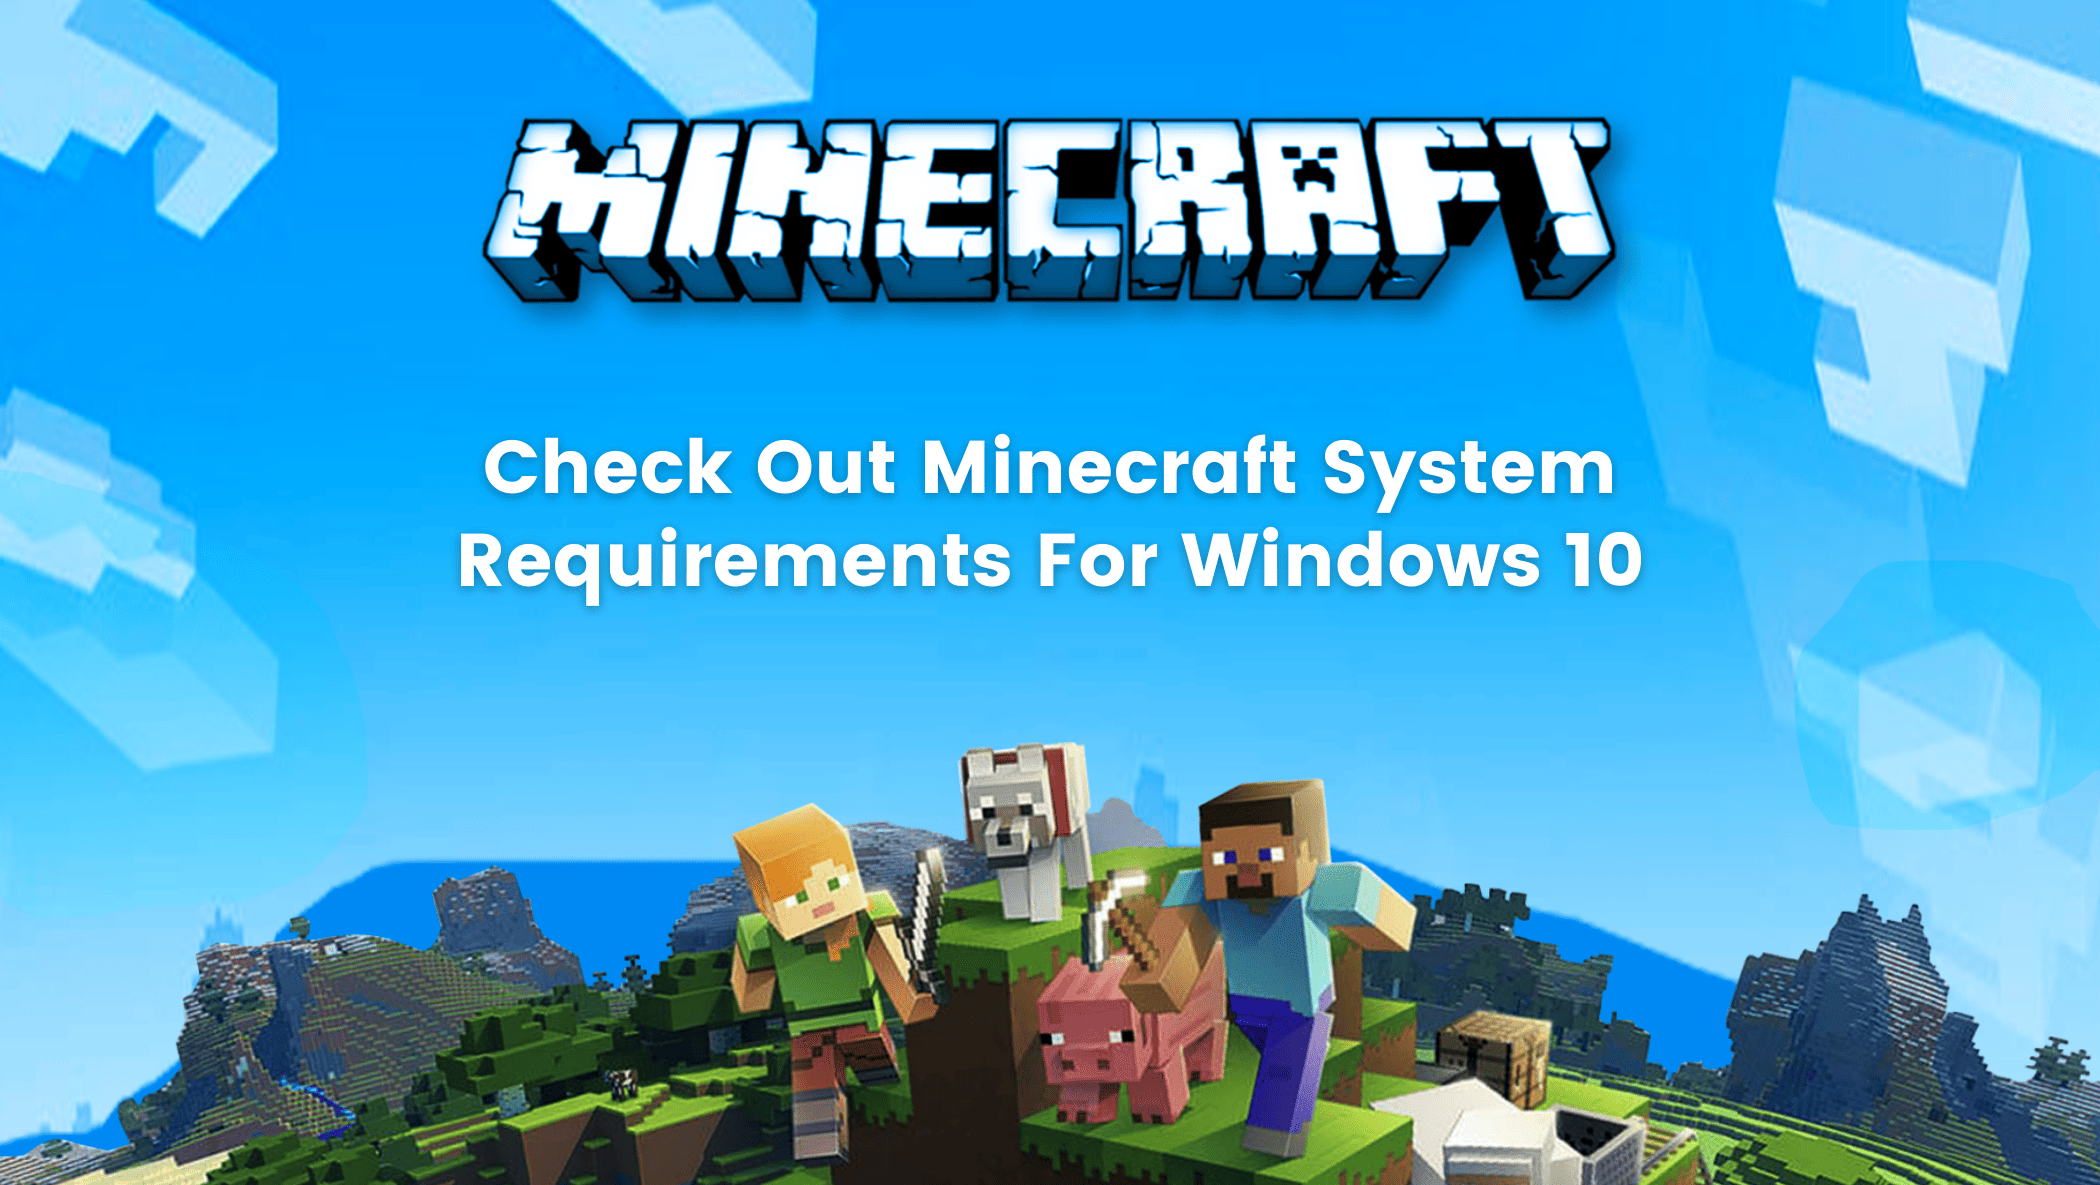 Portavoz Adelante adoptar Check Out Minecraft System Requirements For Windows 10 [2022 Edition] -  BrightChamps Blog